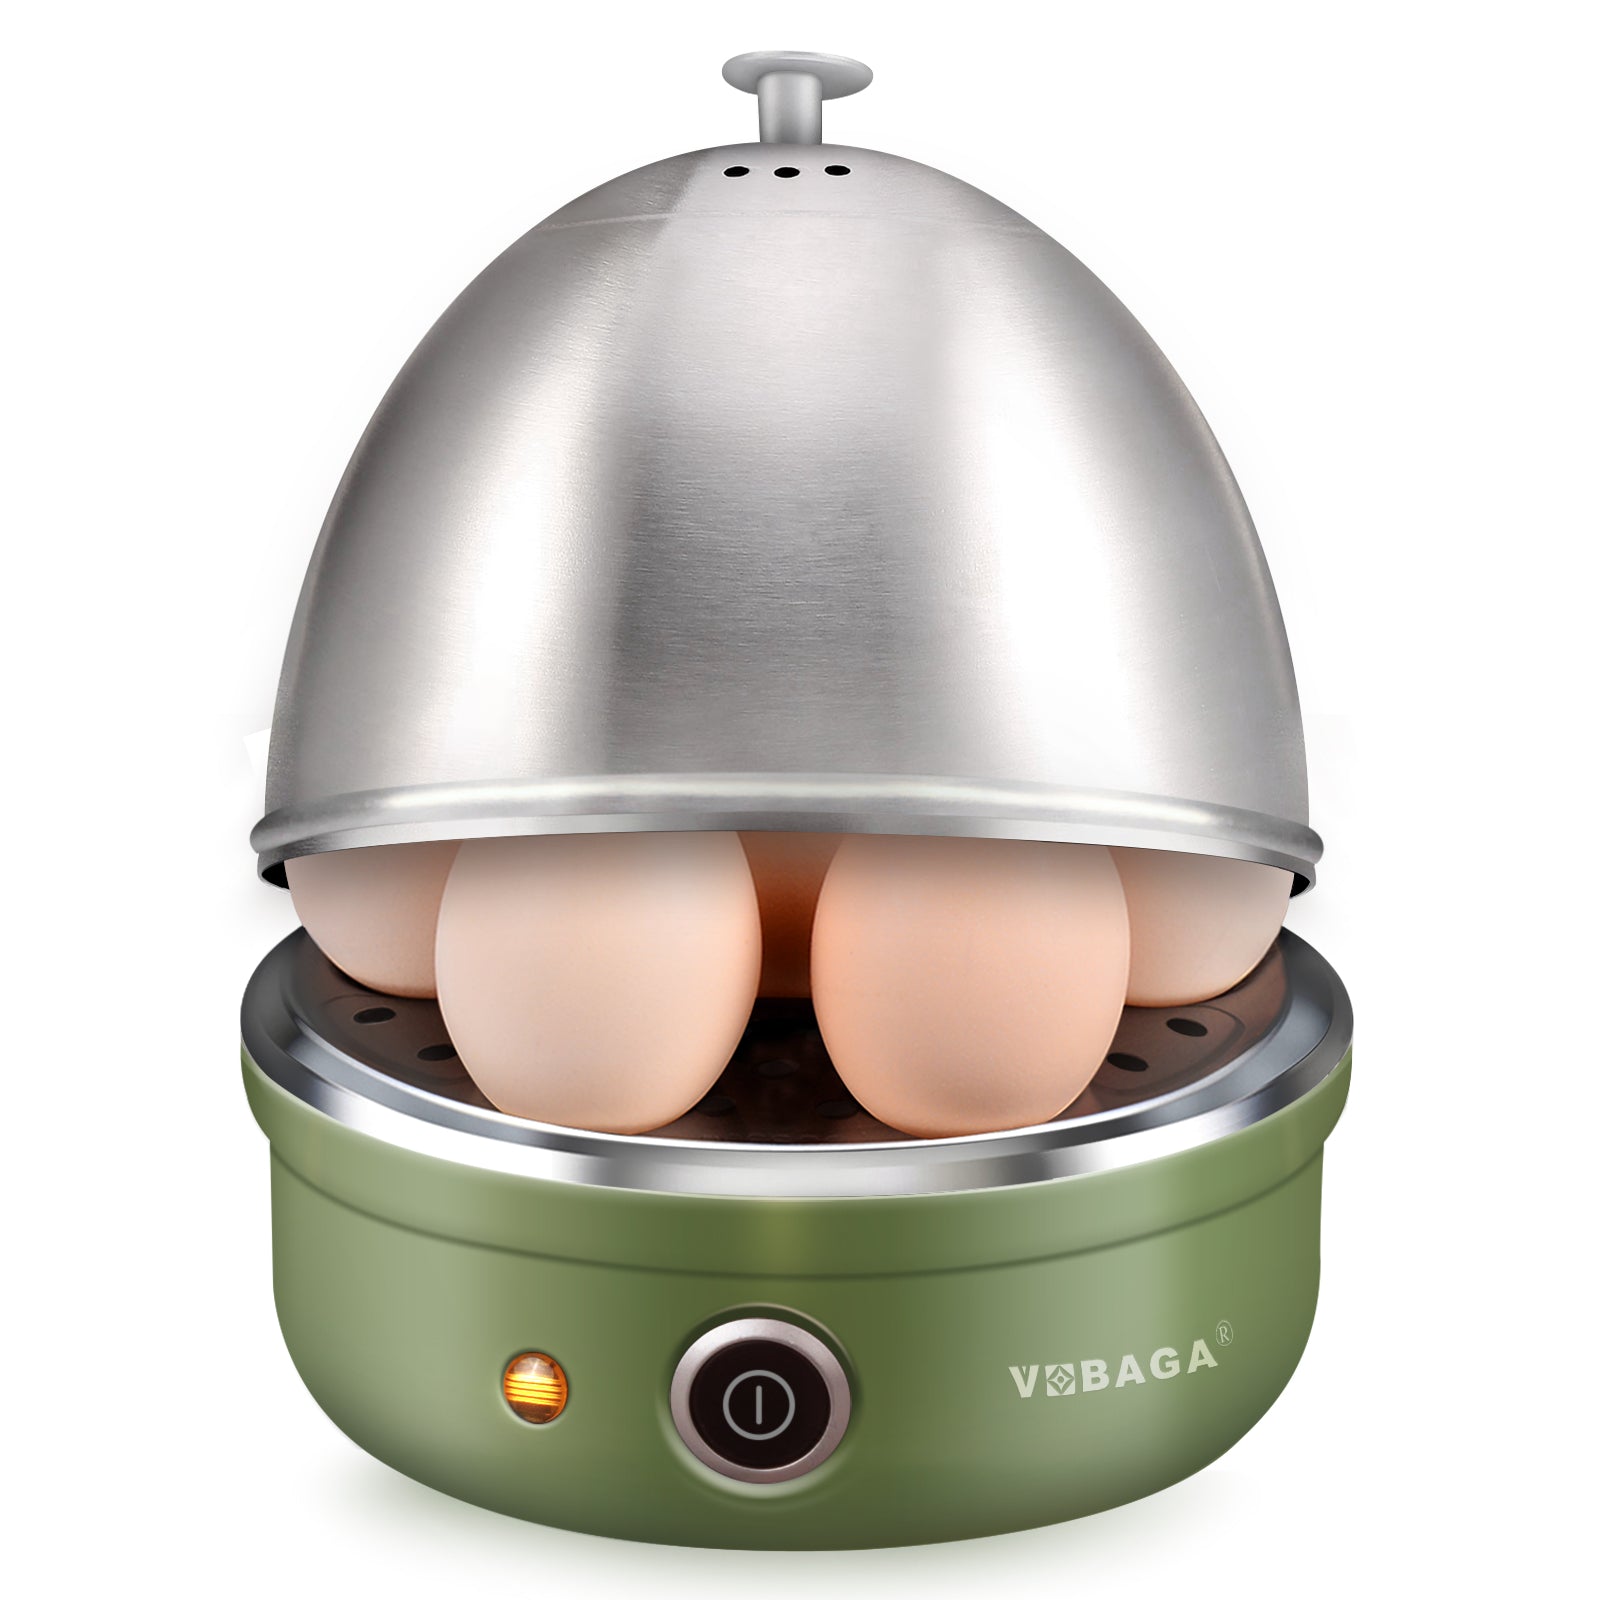 VOBAGA Electric Egg Cooker, Rapid Egg Boiler with Auto Shut Off for Soft, Hard Boiled, Steamed Eggs (Yellow)